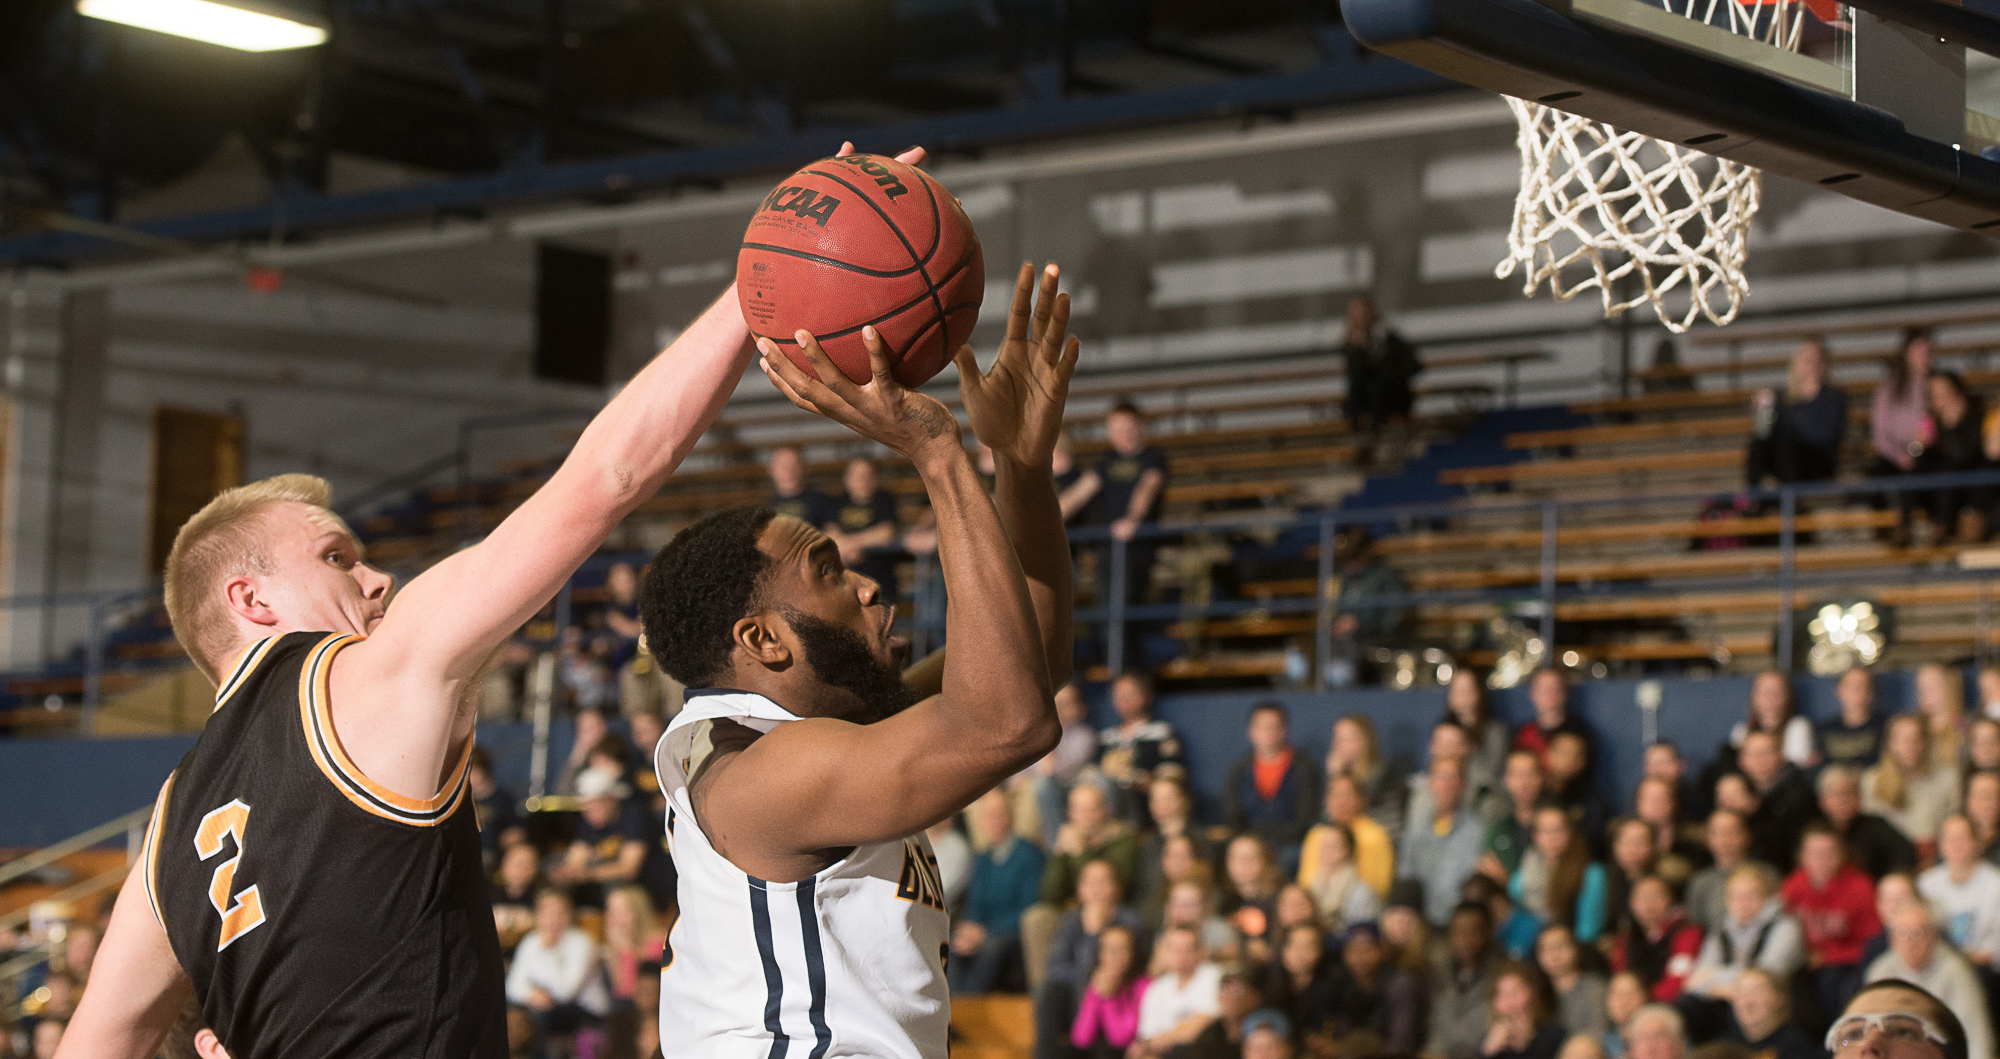 Ben Boots scored nine points, grabbed four rebounds and blocked one shot against the Blugolds.